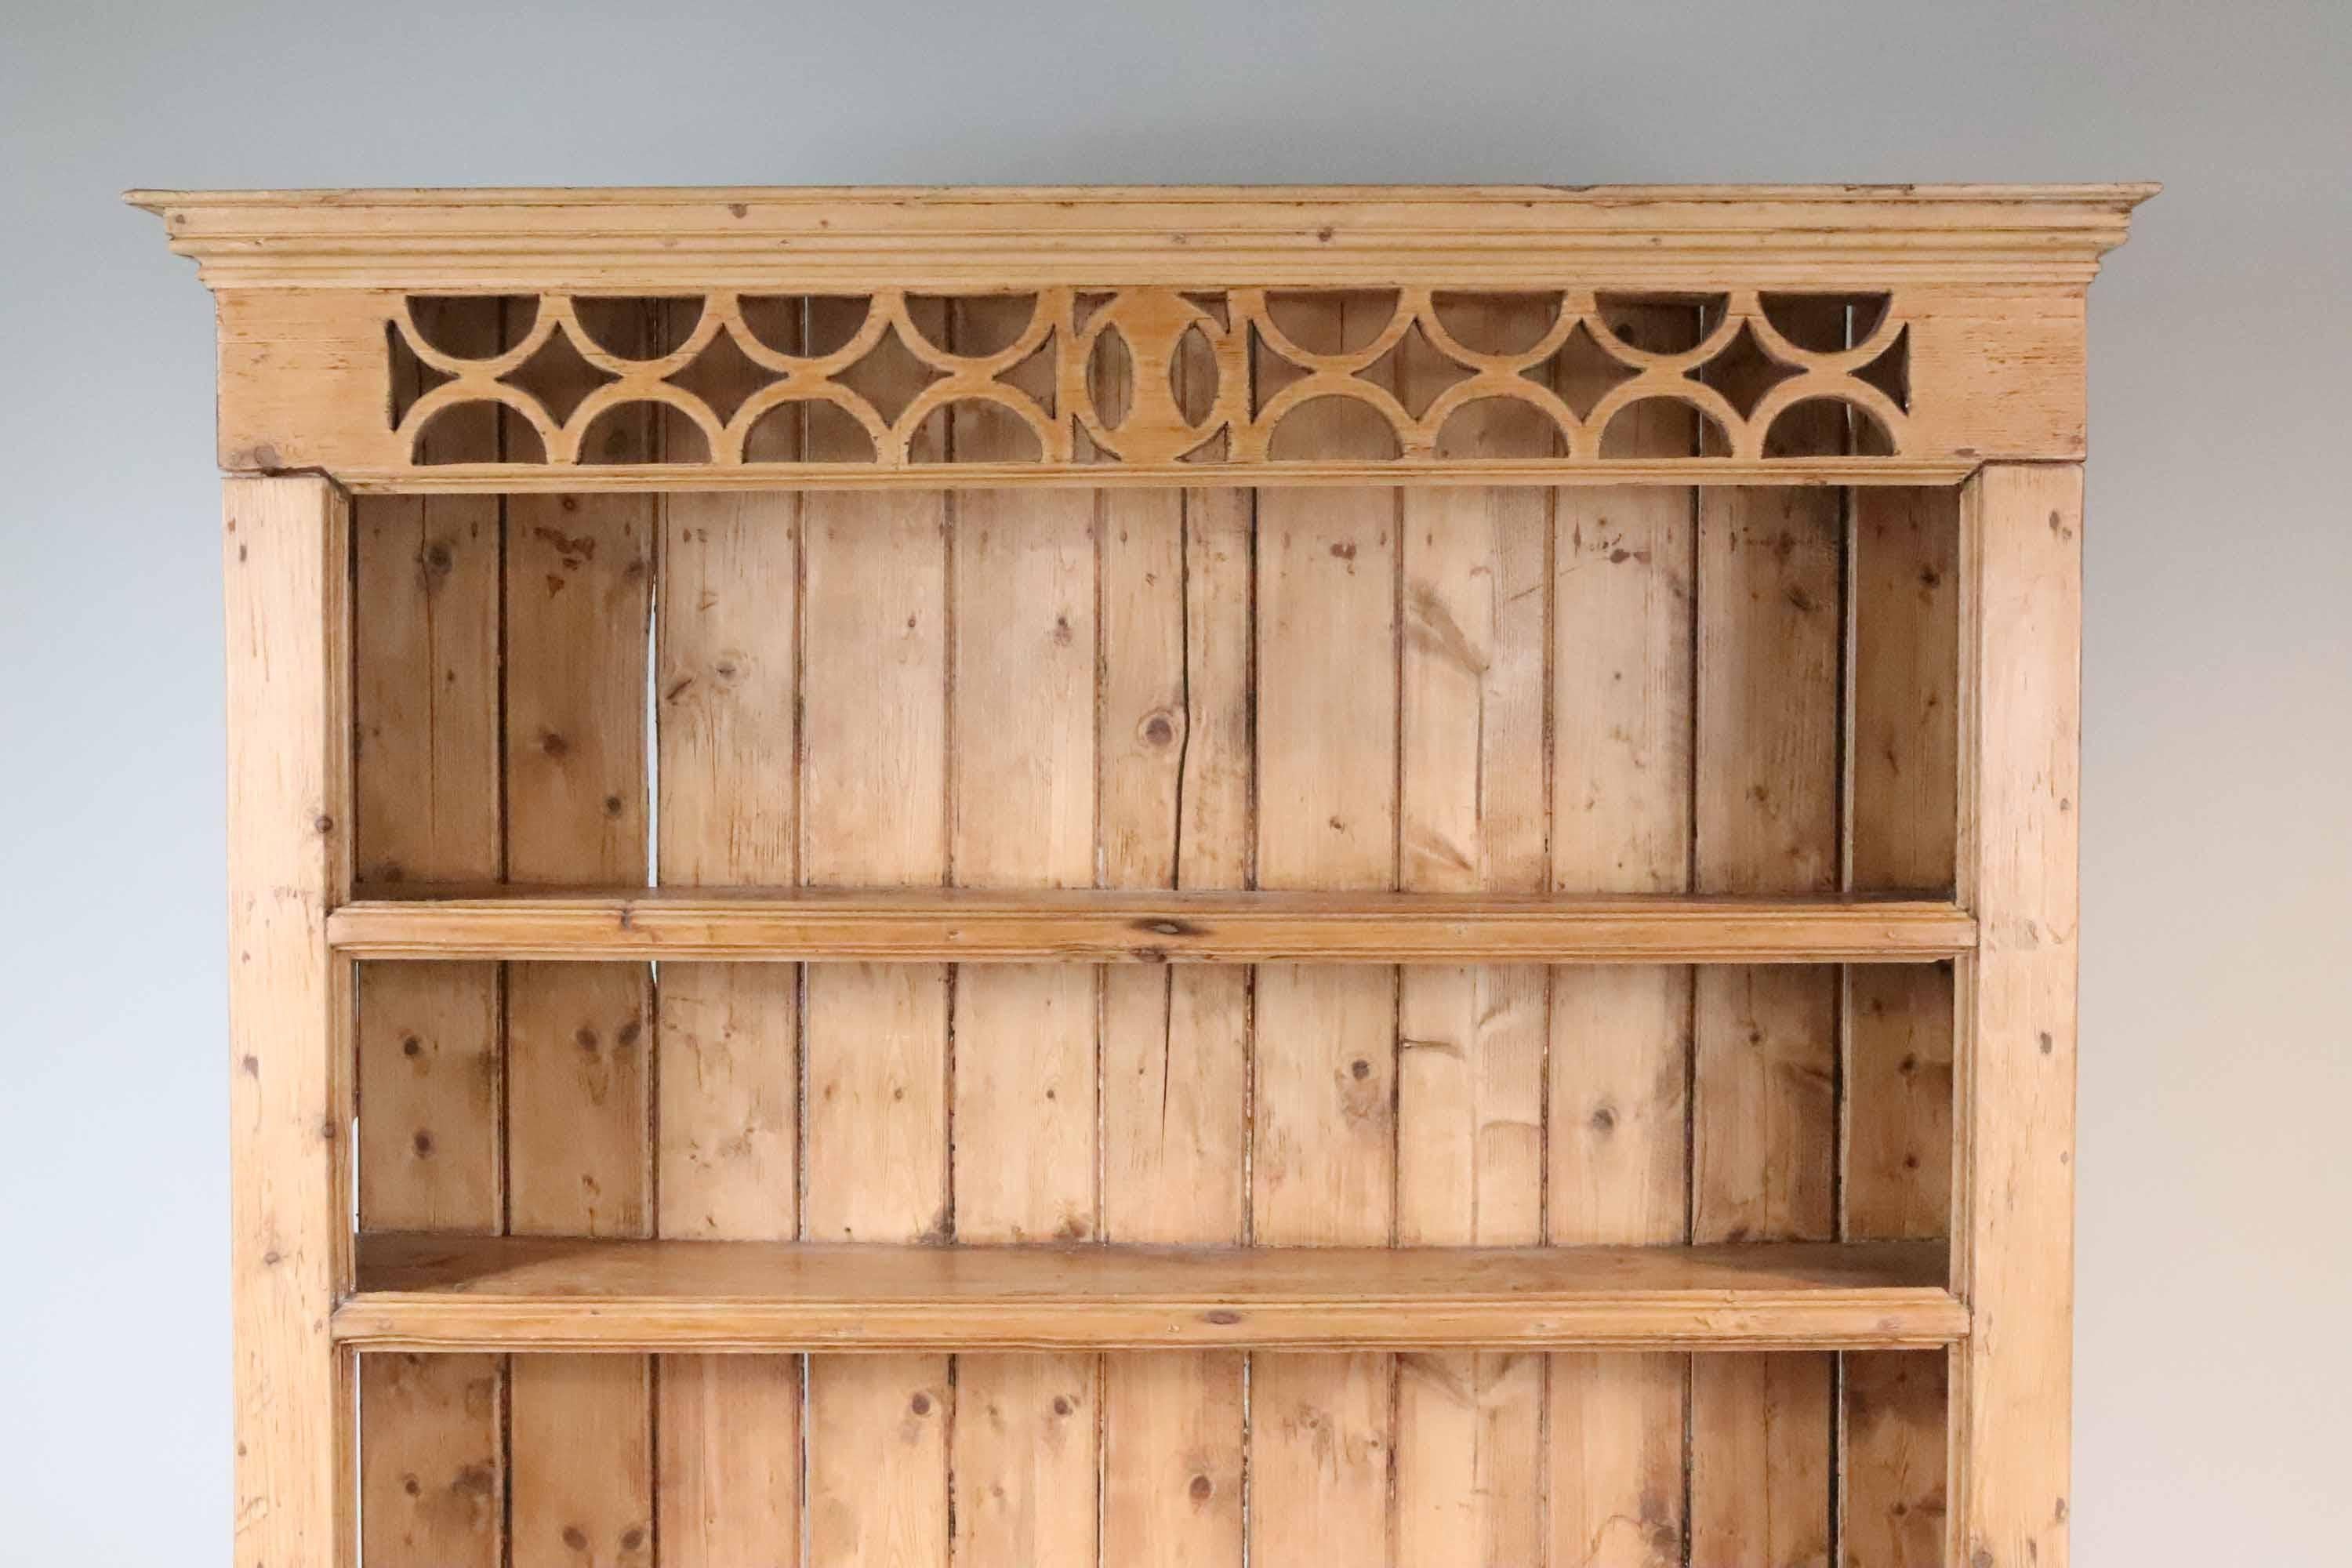 A charming Irish country scrubbed pine step-back cupboard with open shelves above a lower cabinet with two drawers and two doors, mid 19th century. Interesting open fretwork detail above the shelves. The piece is one section, does not come apart.